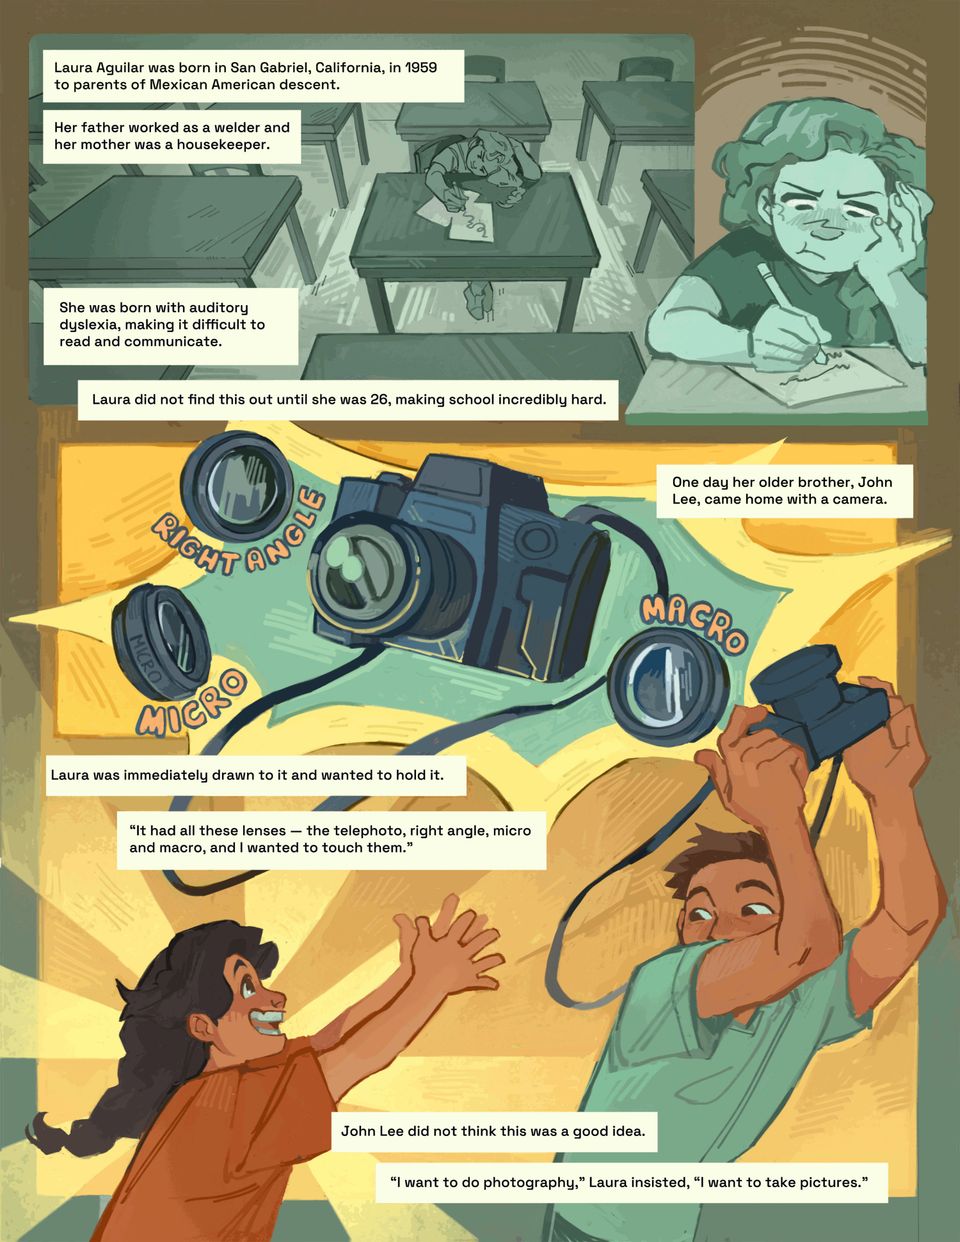 Illustration and text showing Laura growing up struggling with school and playing with her brother’s camera.